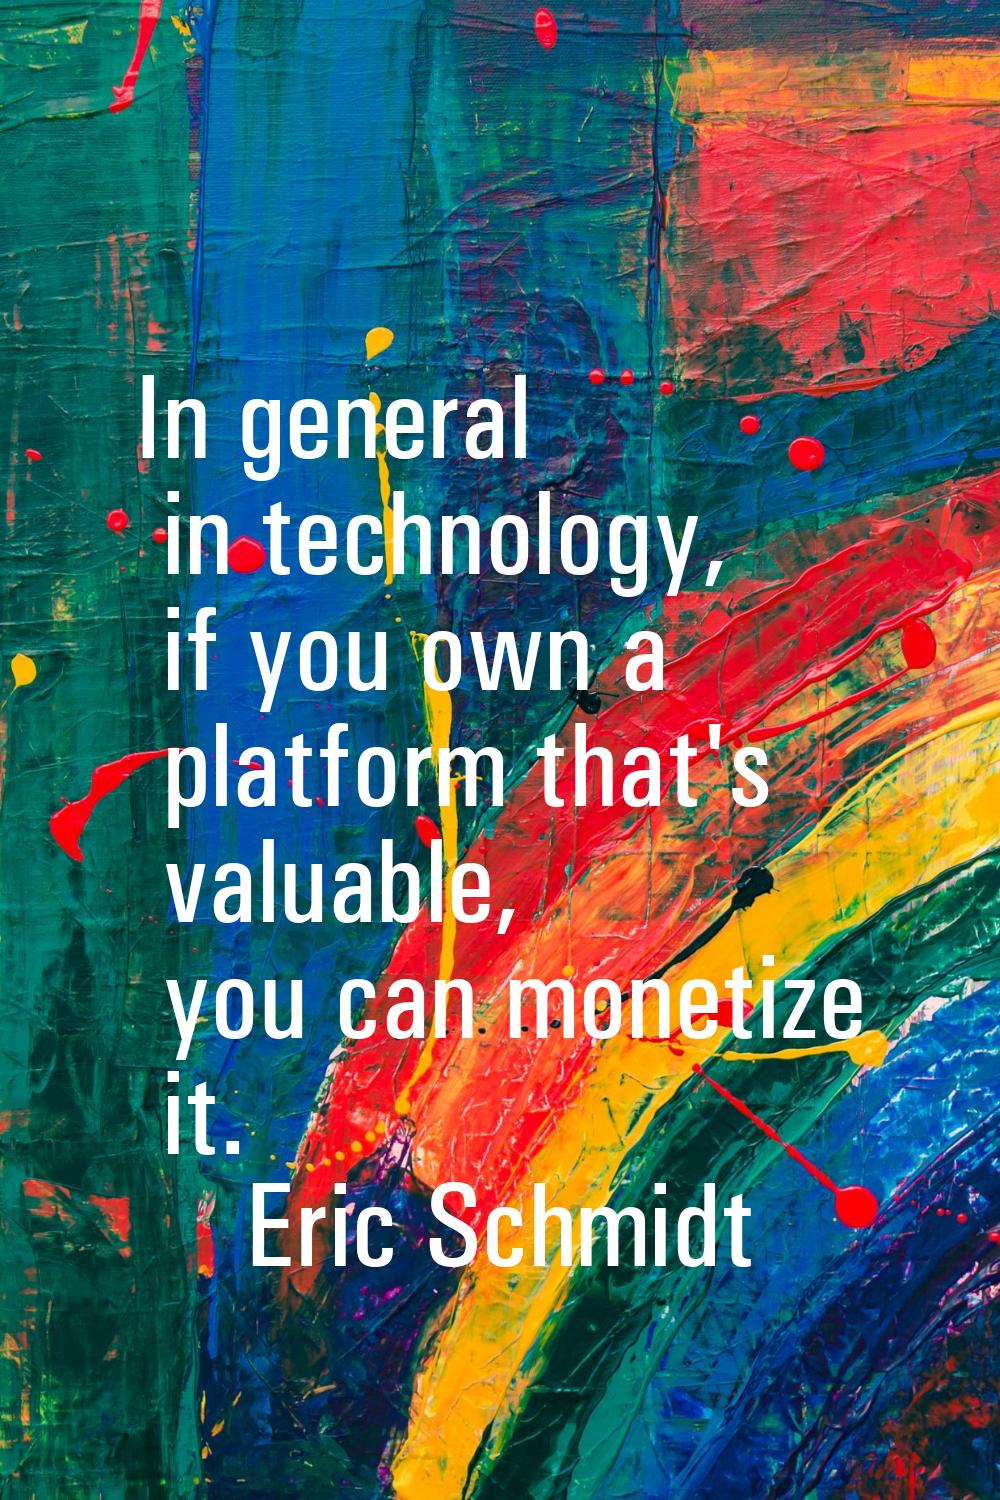 In general in technology, if you own a platform that's valuable, you can monetize it.